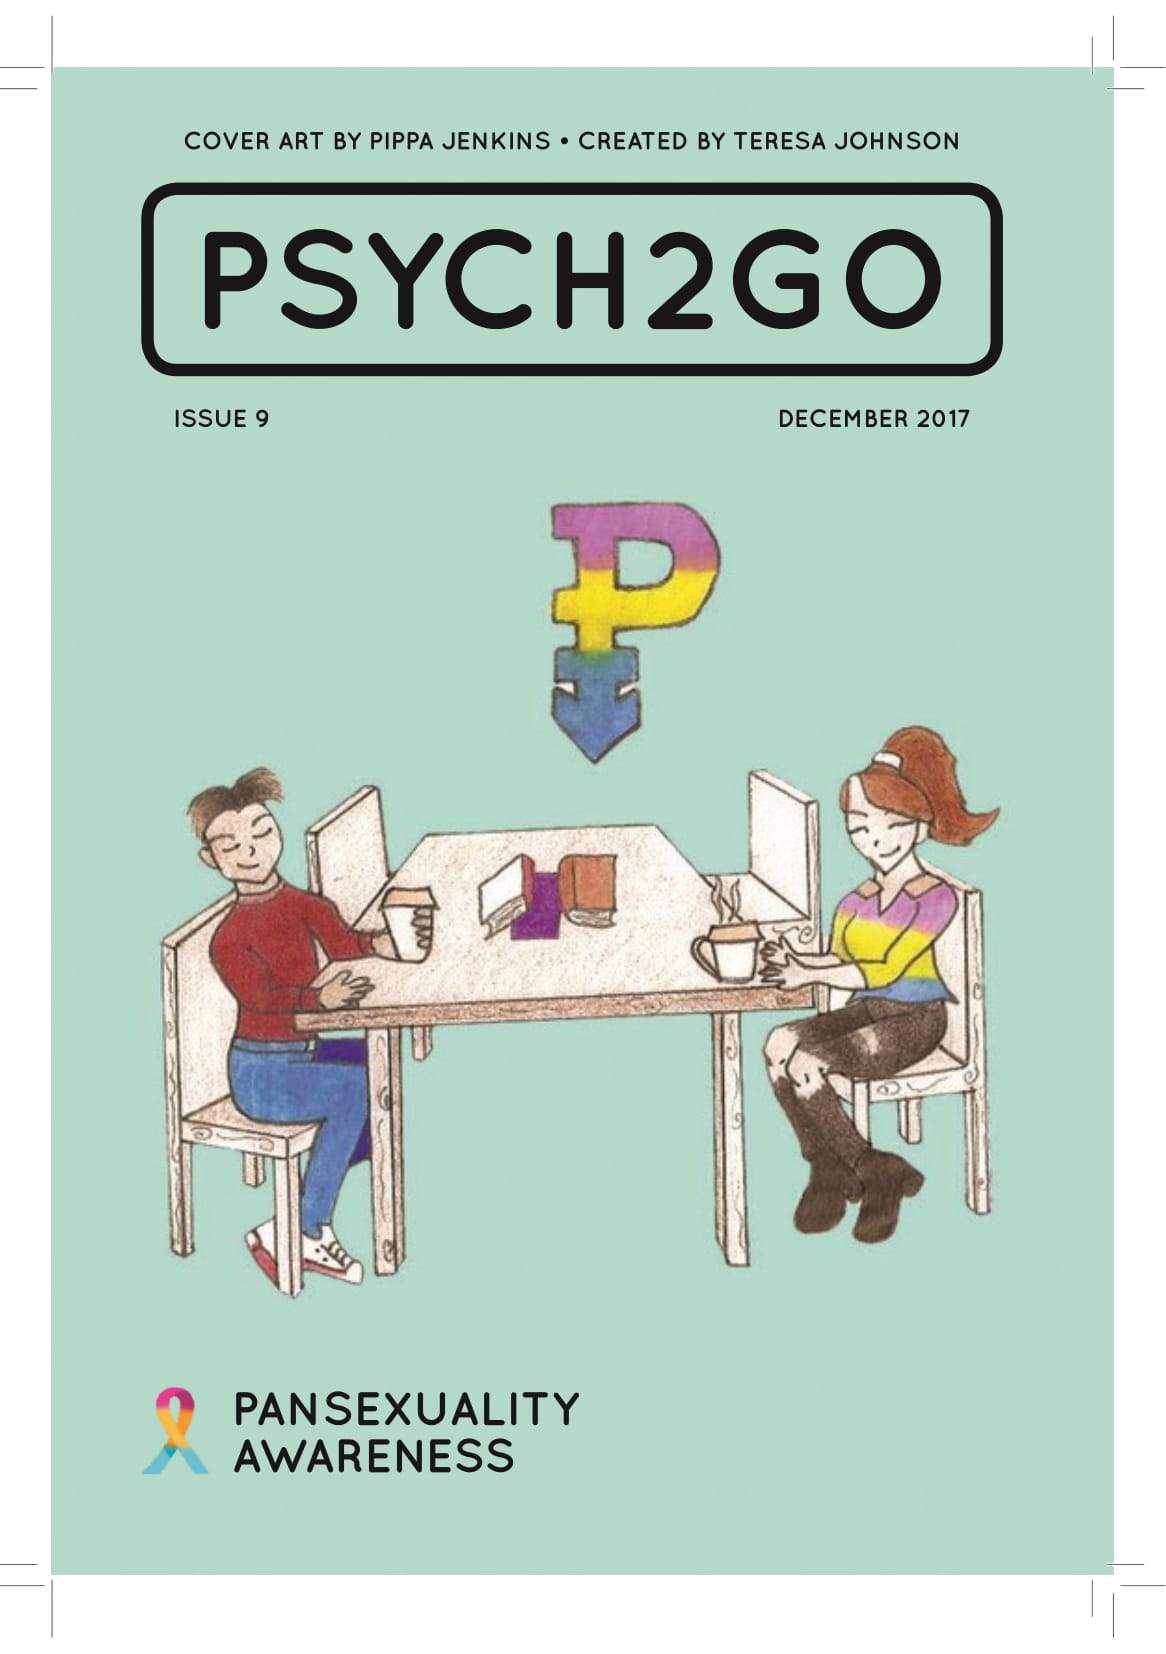 PSYCH2GO Magazine #6-9 - Asexuality, Bisexuality, Non-binary Genders & Pansexuality(Digital)